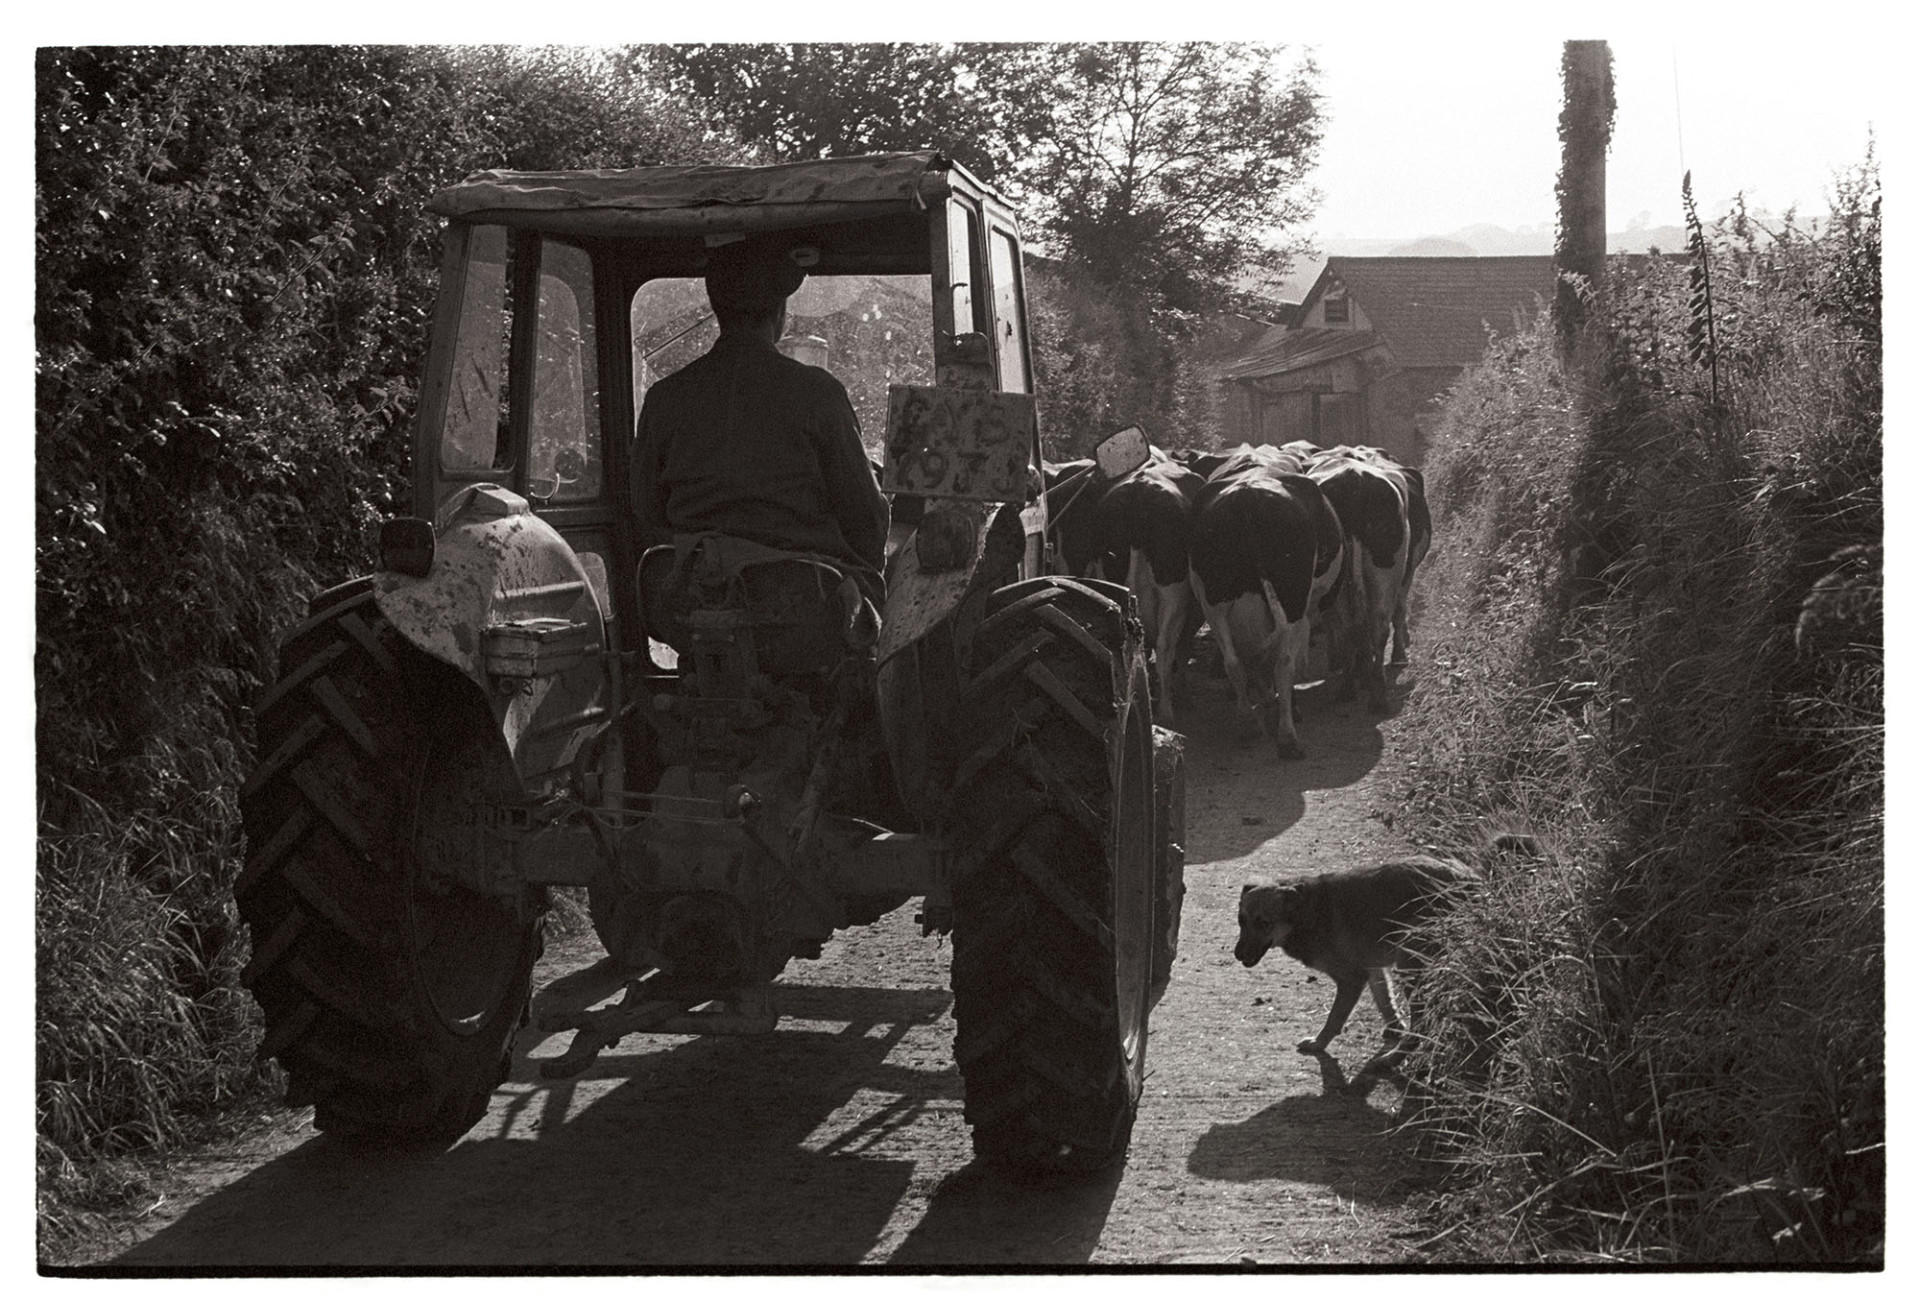 Farmer in tractor driving cows to be milked, dog. 
[Norman Lock driving a tractor and herding cows up a country lane, on their way to be milked, with a dog at Cleave, Dolton.]